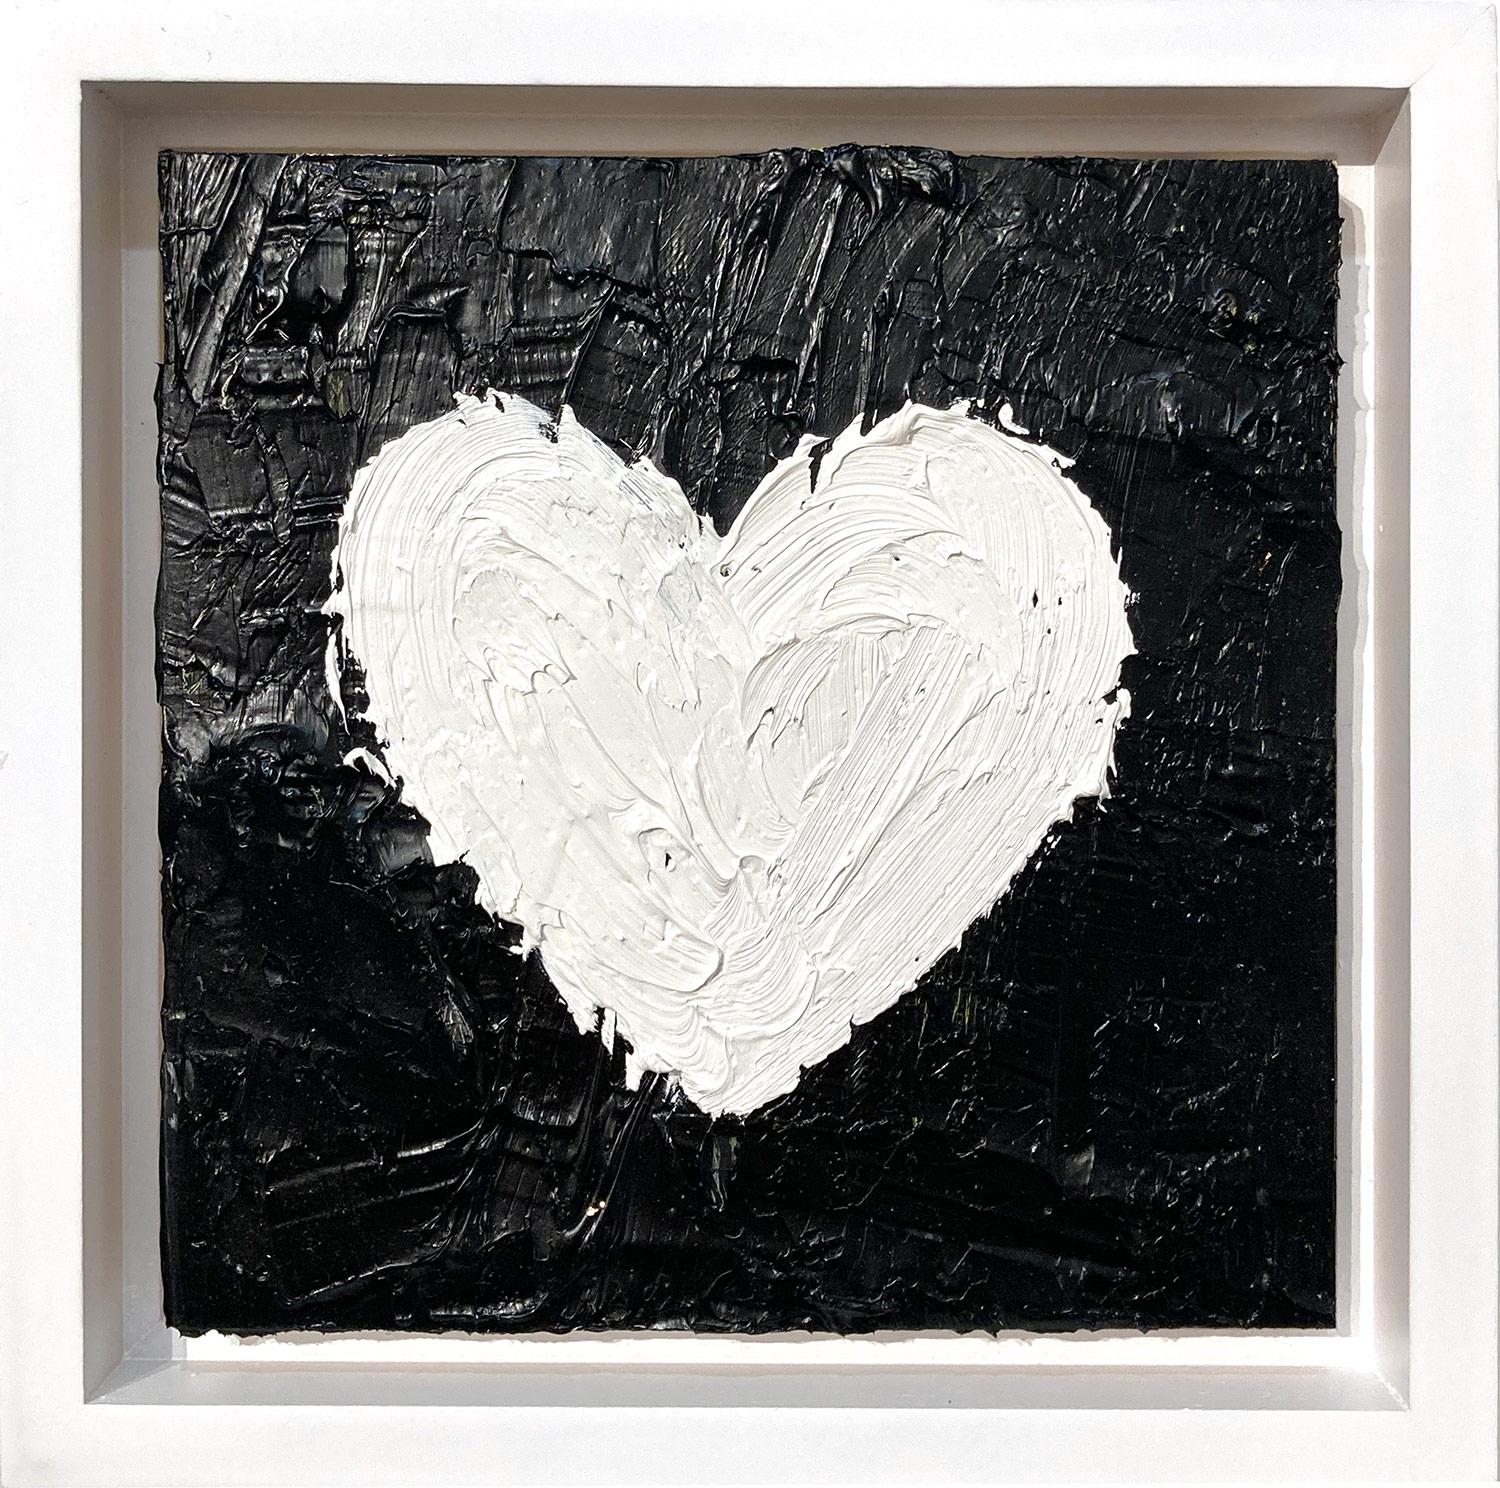 Cindy Shaoul Figurative Painting - "My Heart on Noir" Black and White Contemporary Oil Painting with Floater Frame